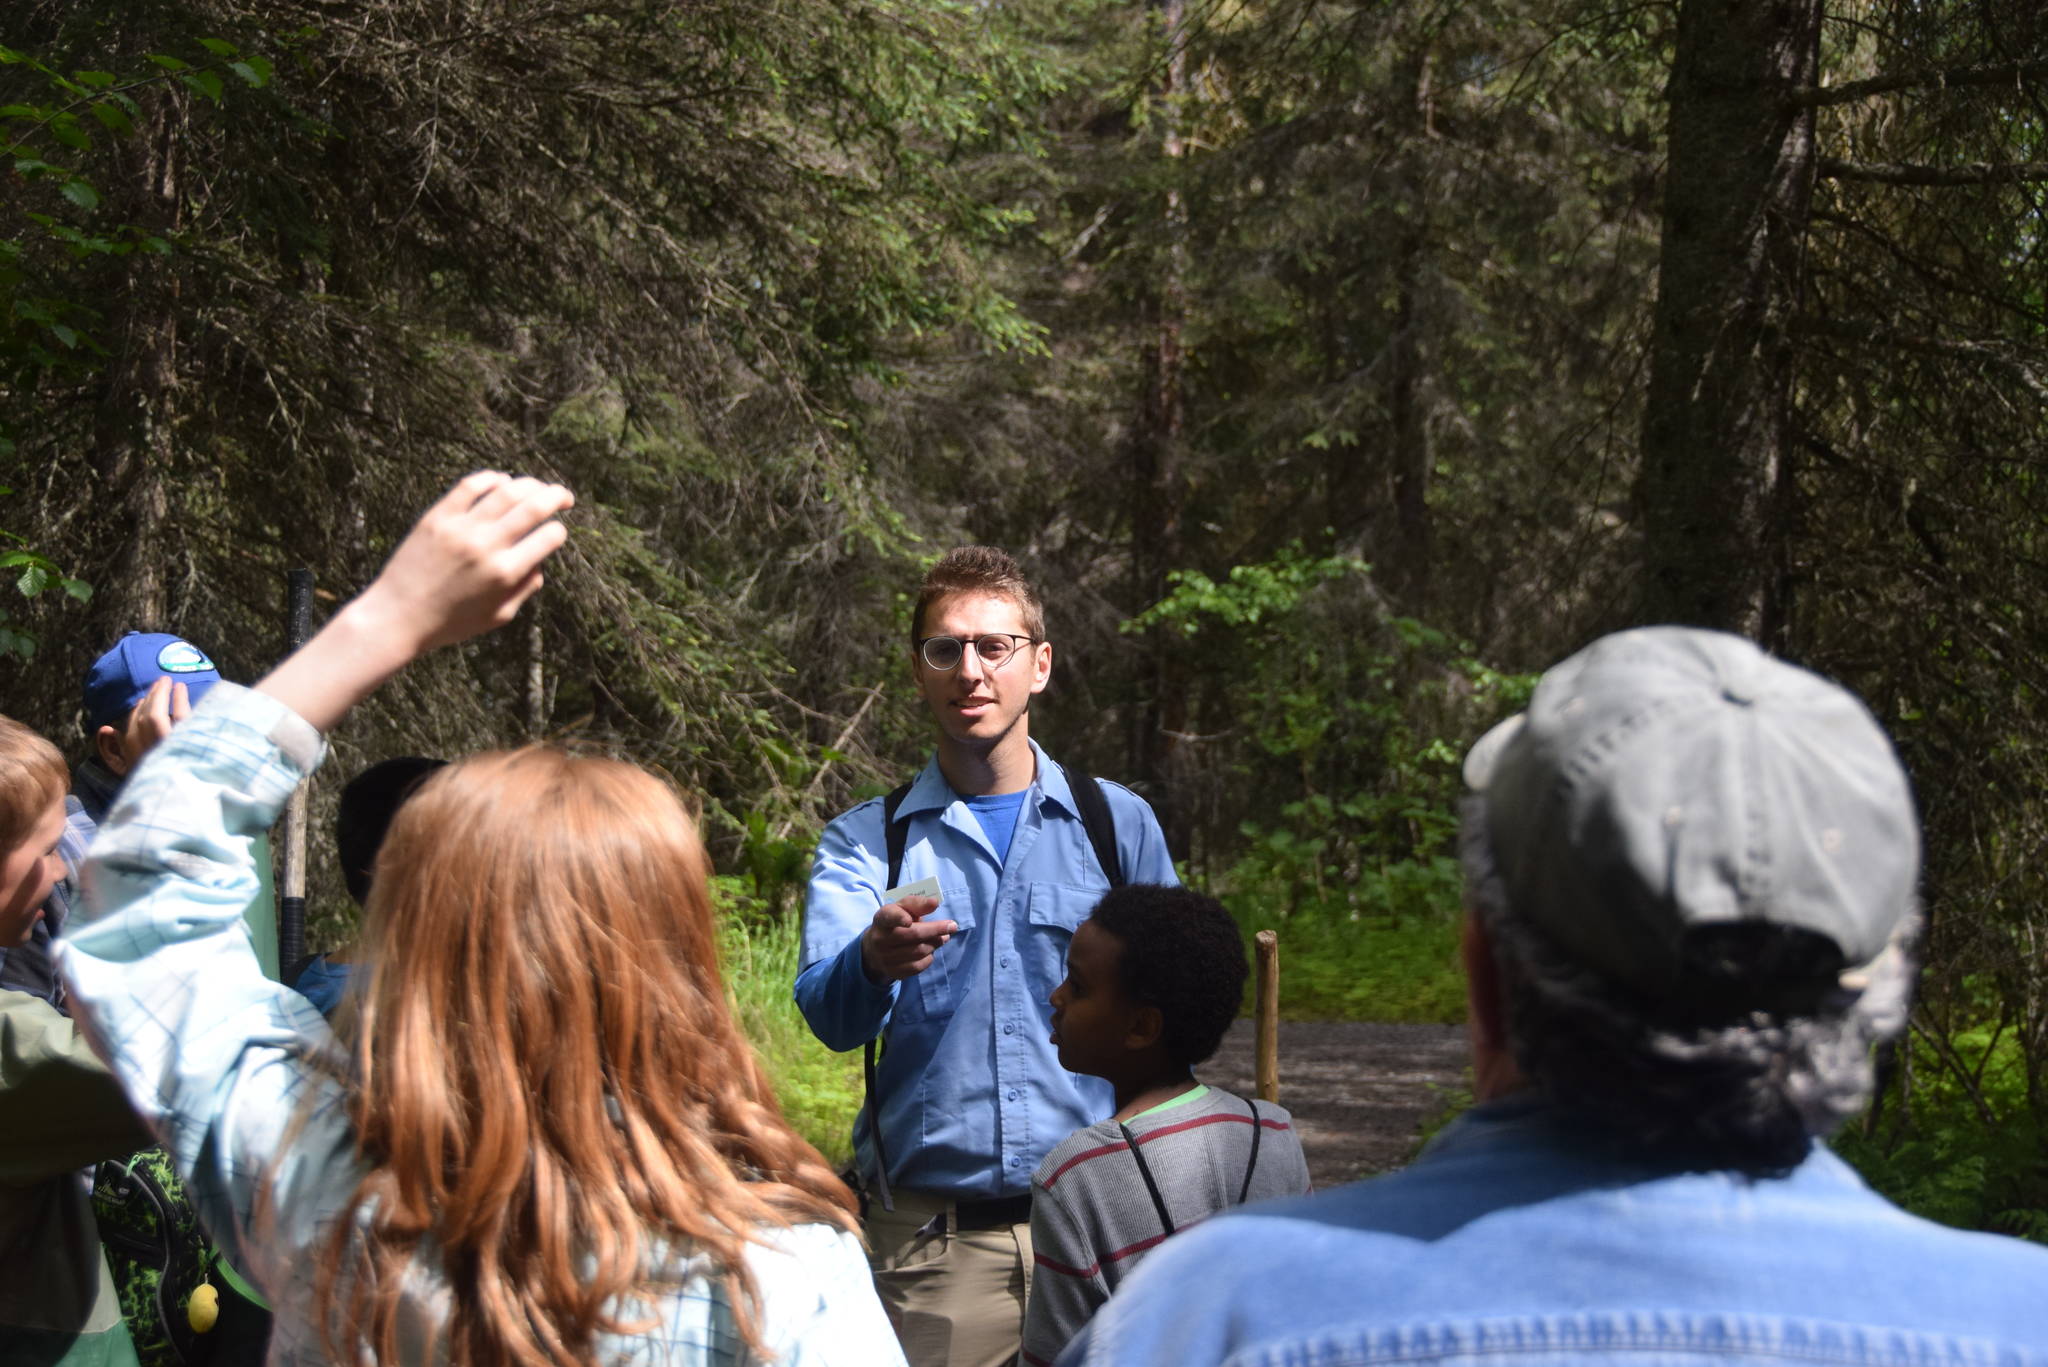 Environmental education intern David Fink answers questions from the hikers during a guided hike on Centennial Trail in the Kenai National Wildlife Refuge on June 1, 2019. (Photo by Brian Mazurek/Peninsula Clarion)